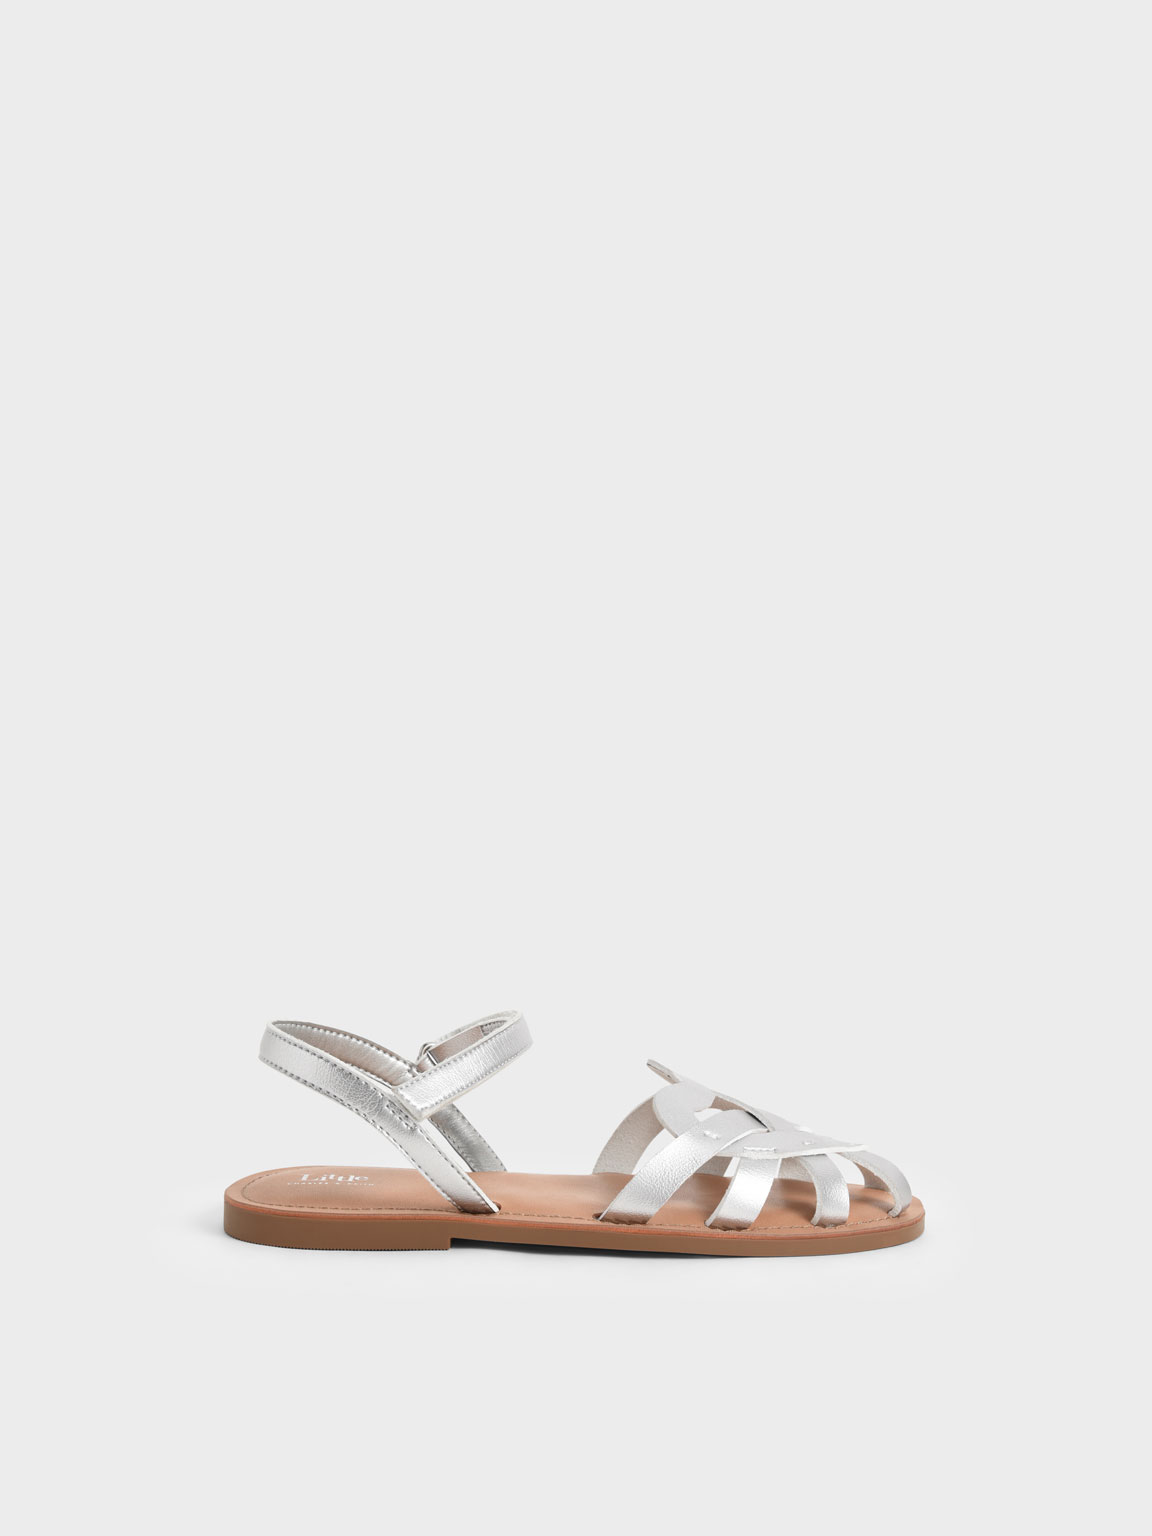 Girls’ Caged Ankle-Strap Sandals